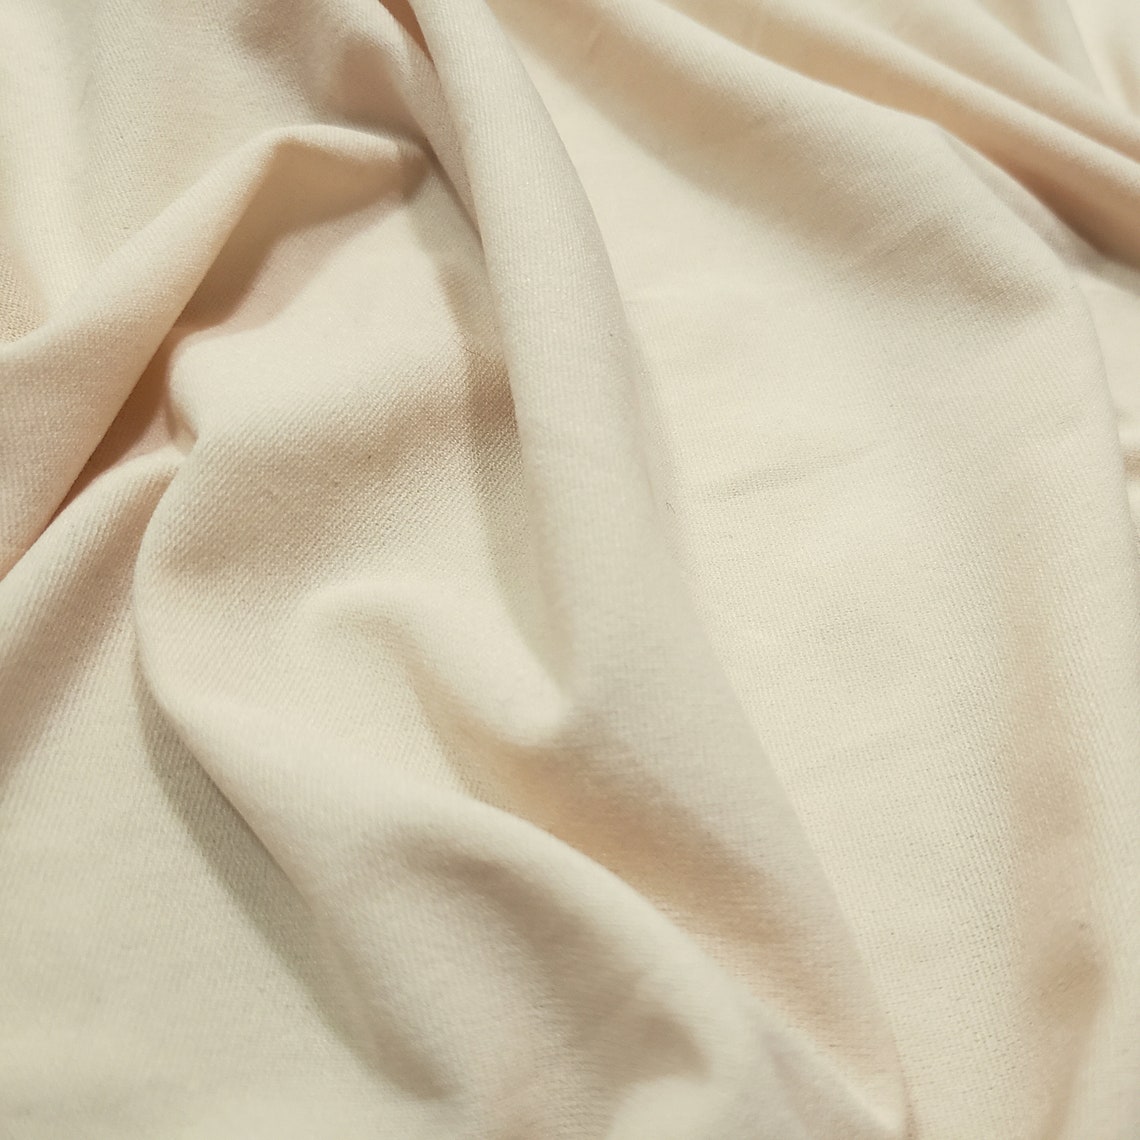 Pale Nude Swimsuit Lining Fabric by the Yard - Etsy